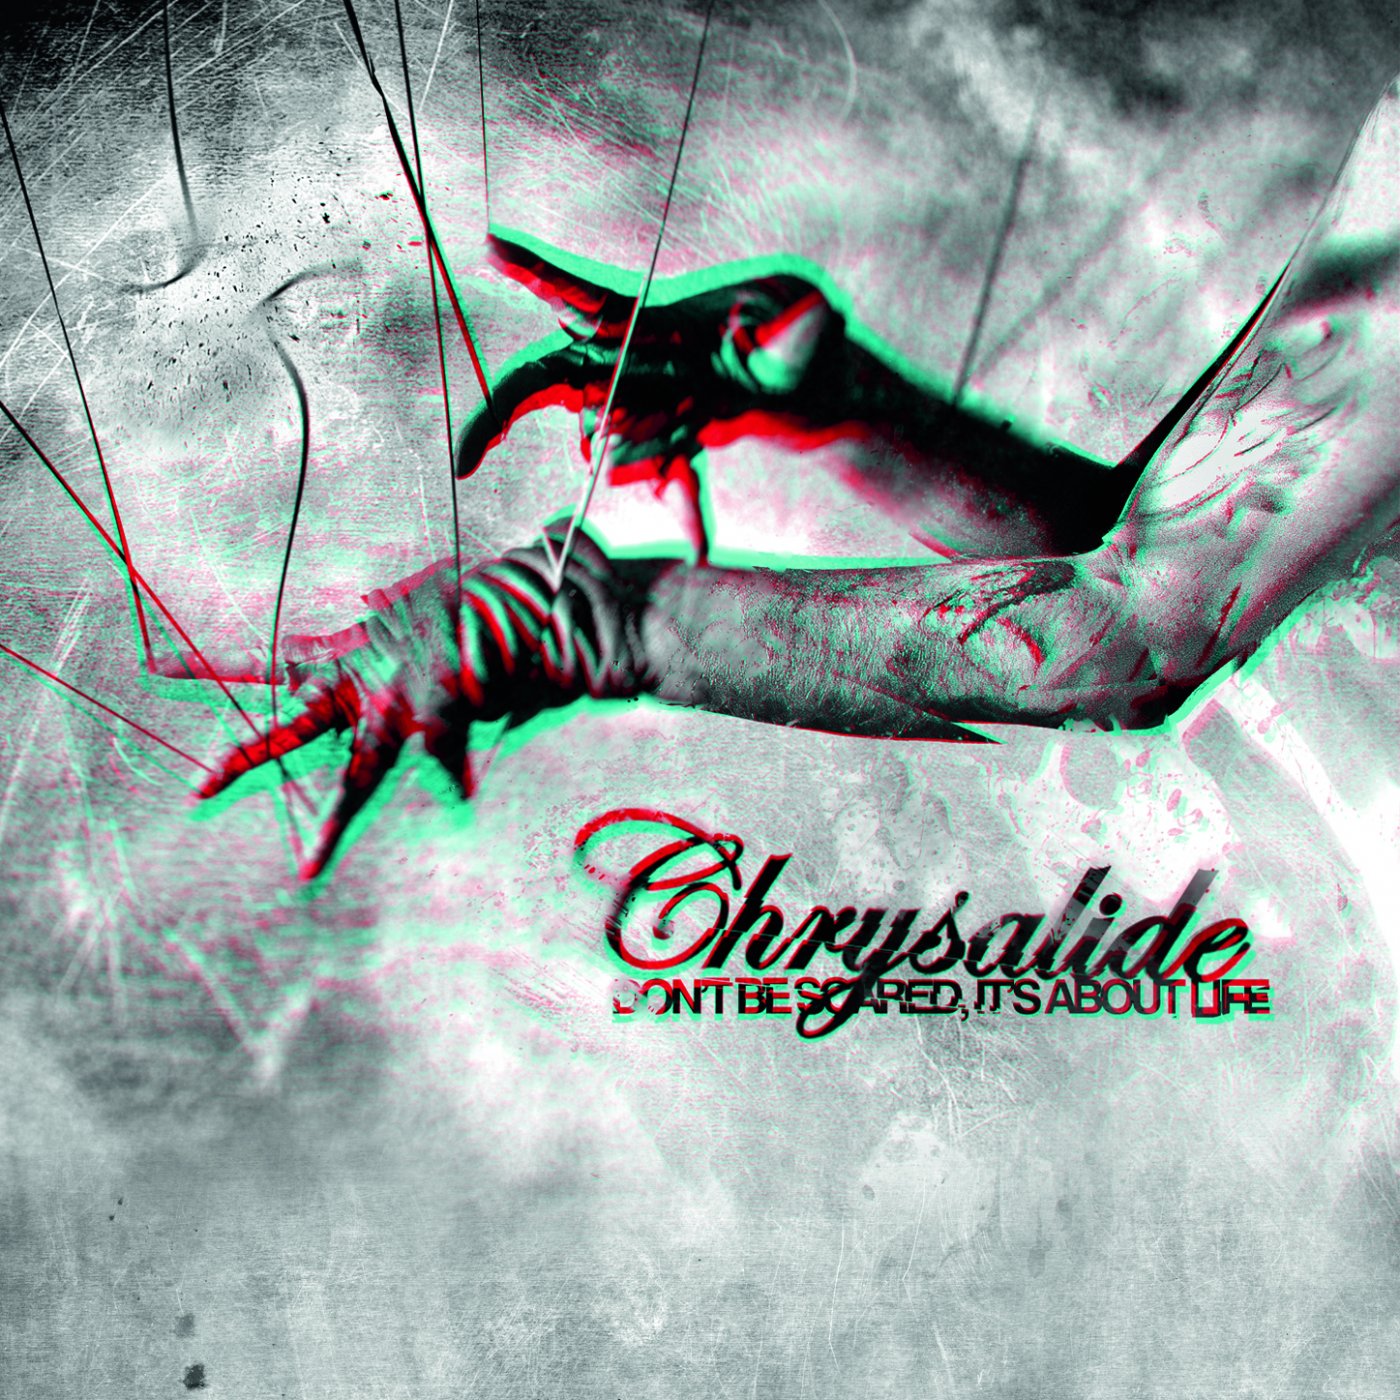 Chrysalide – Don’t be scared, its about life